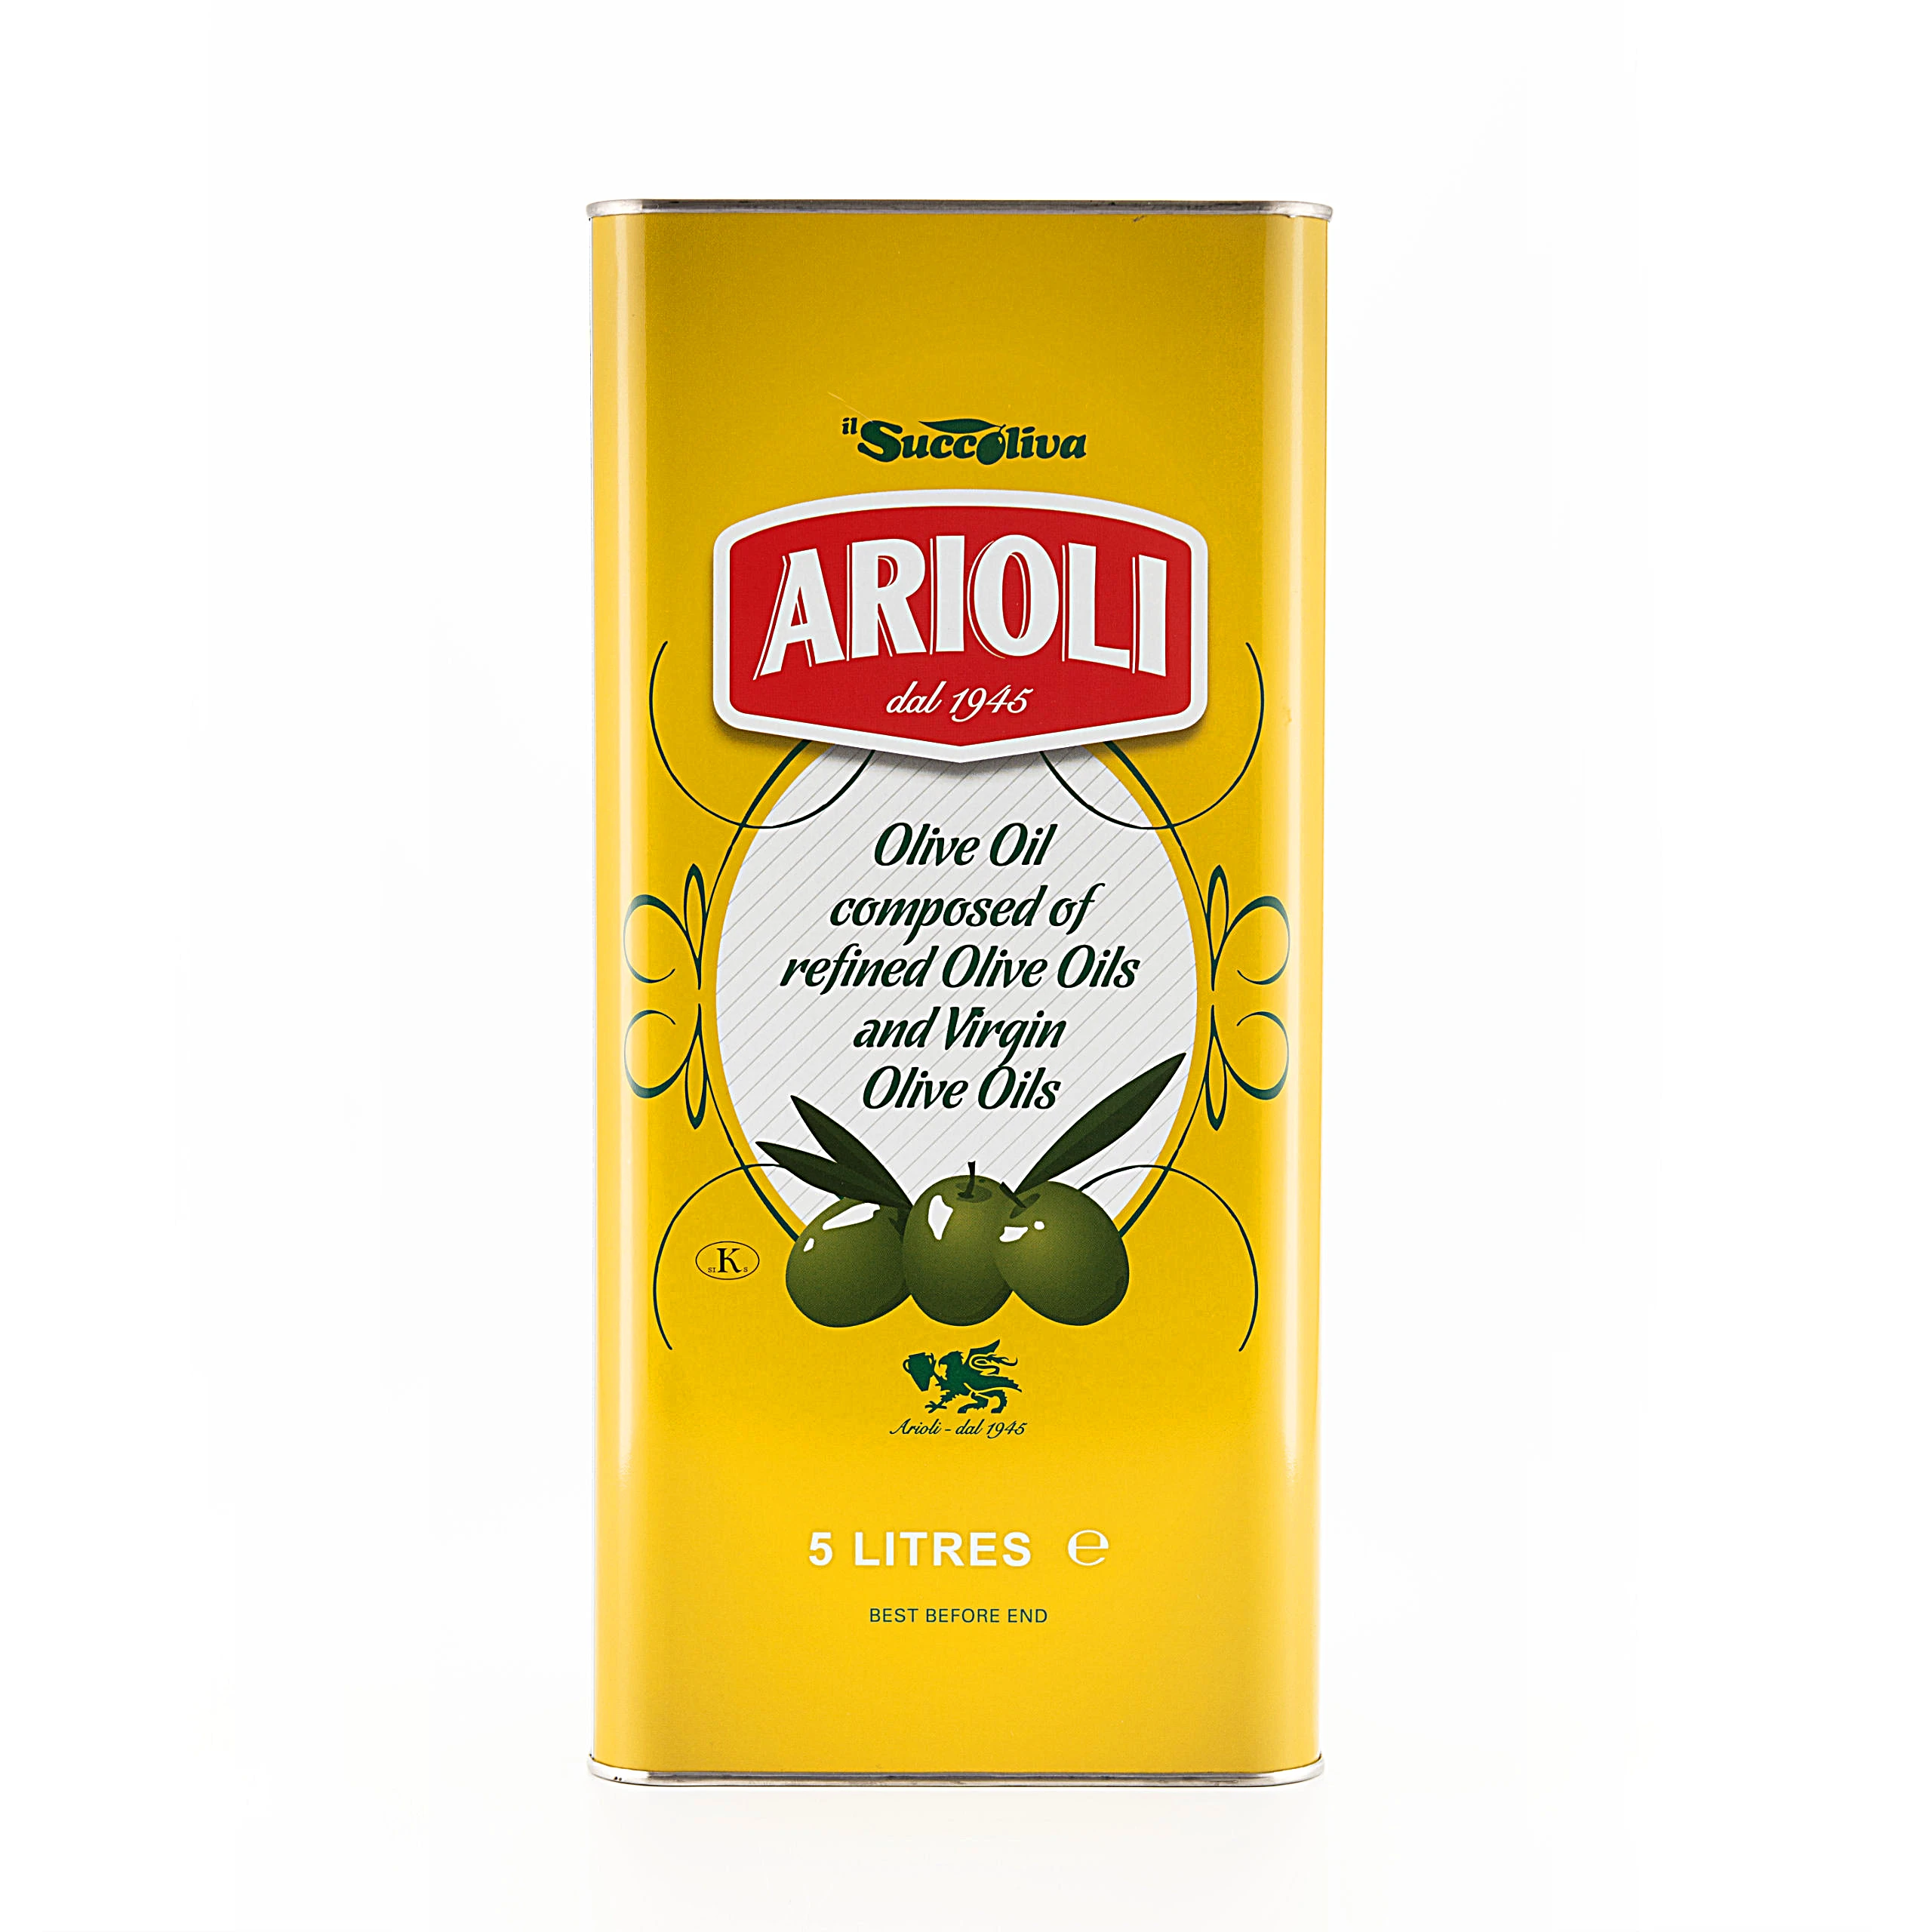 Good Quality Pure Olive Oil Kosher Certified ARIOLI IL SUCCOLIVA 5Lt. Tin for Ho.Re.Ca